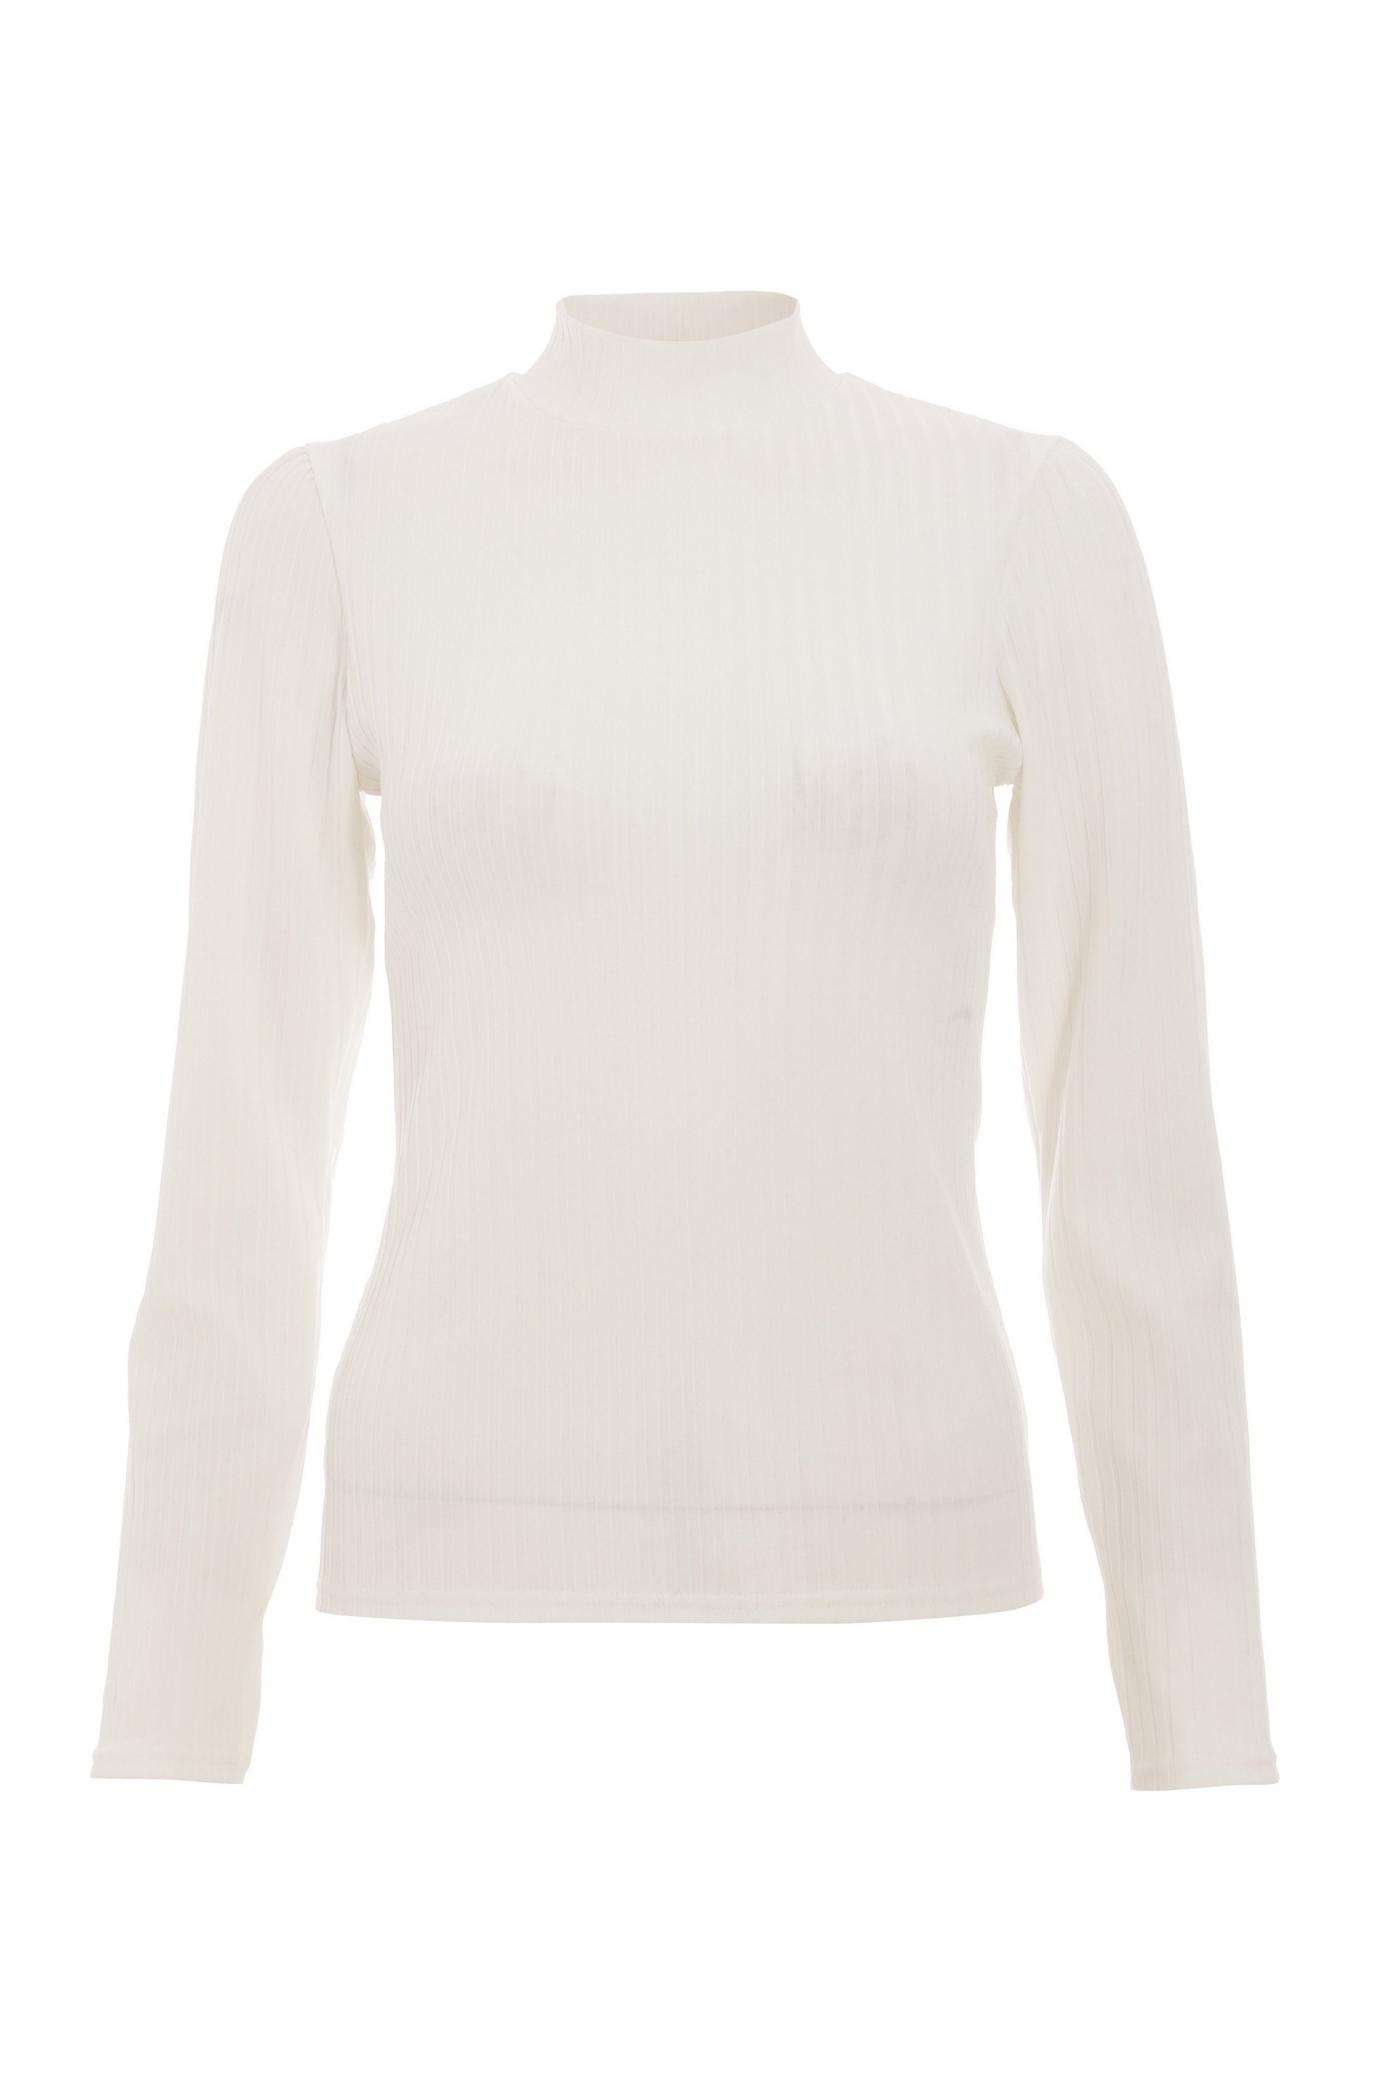 Cream Knit Ribbed Turtle Neck Top